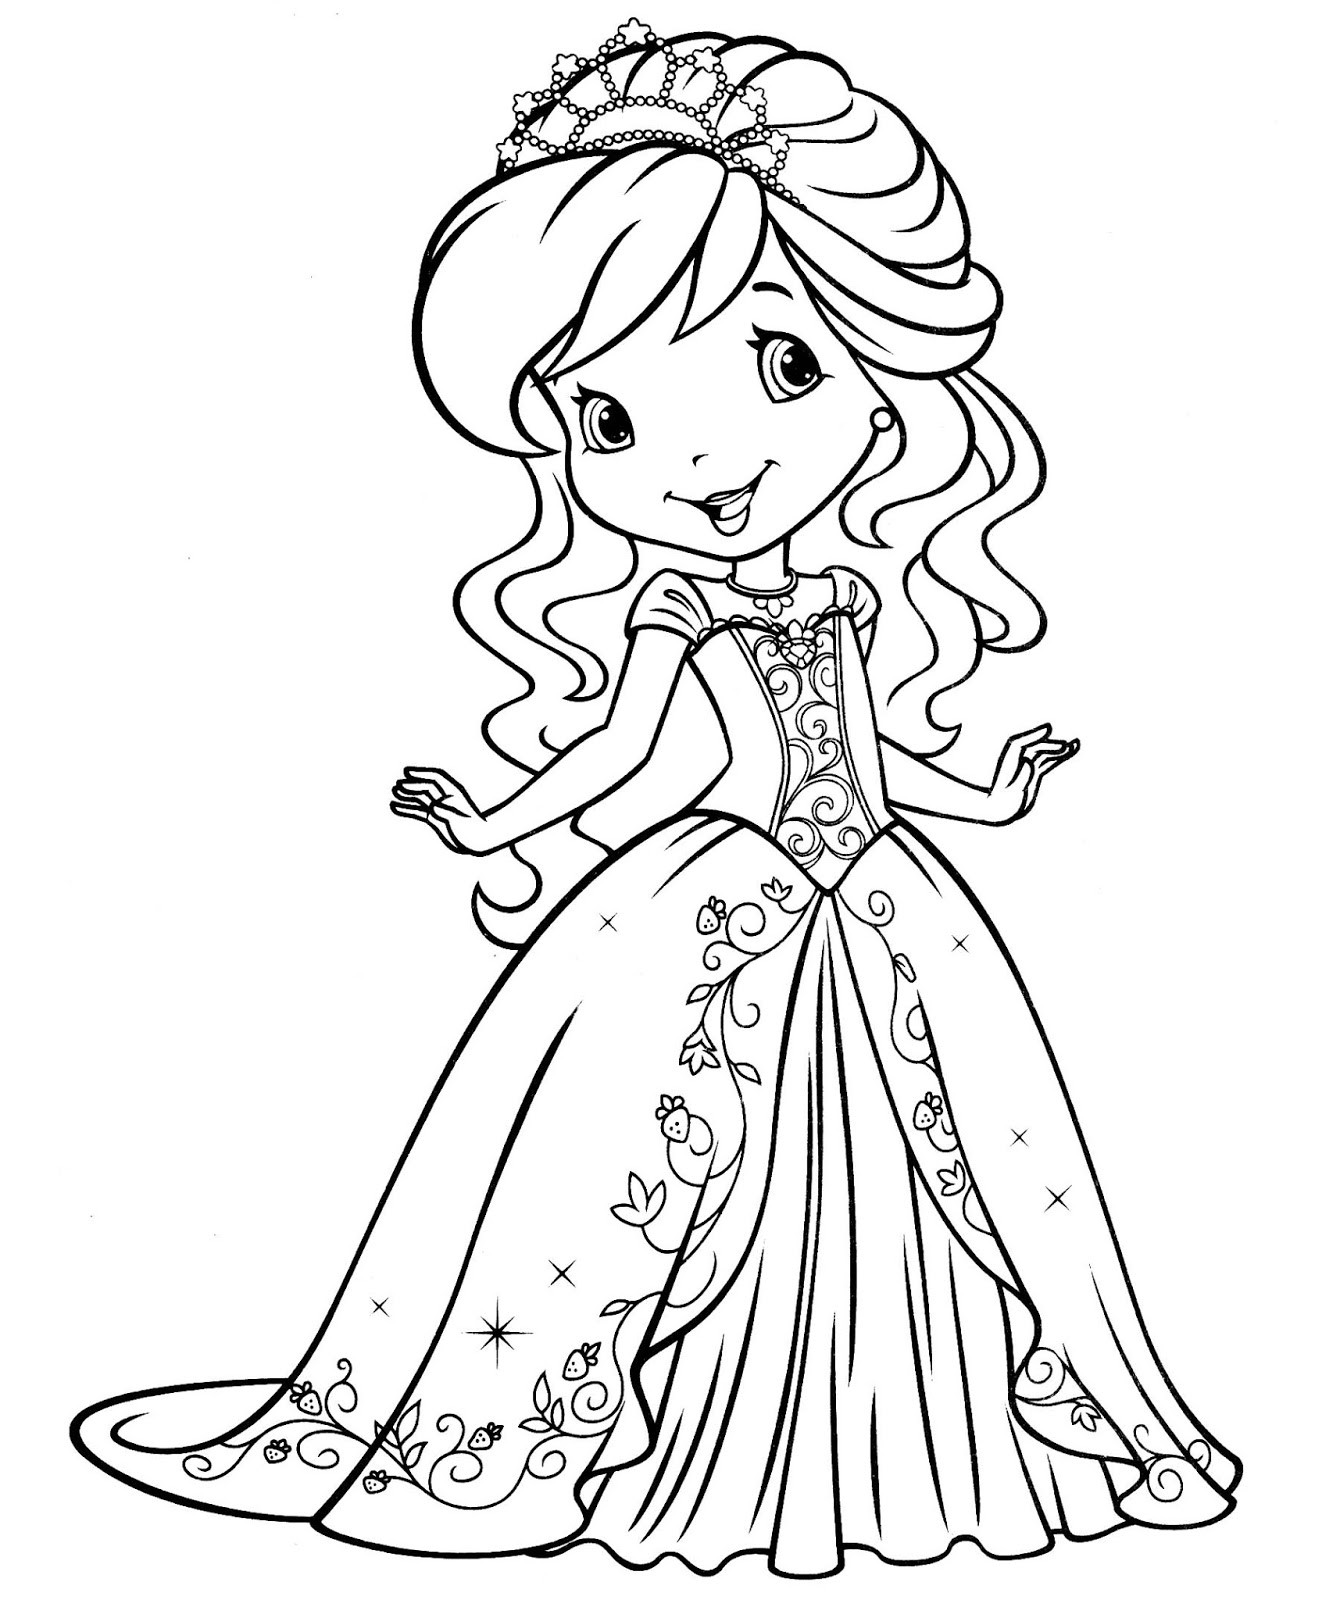 Coloring Sheets Of Girls
 Coloring Pages for Girls Best Coloring Pages For Kids